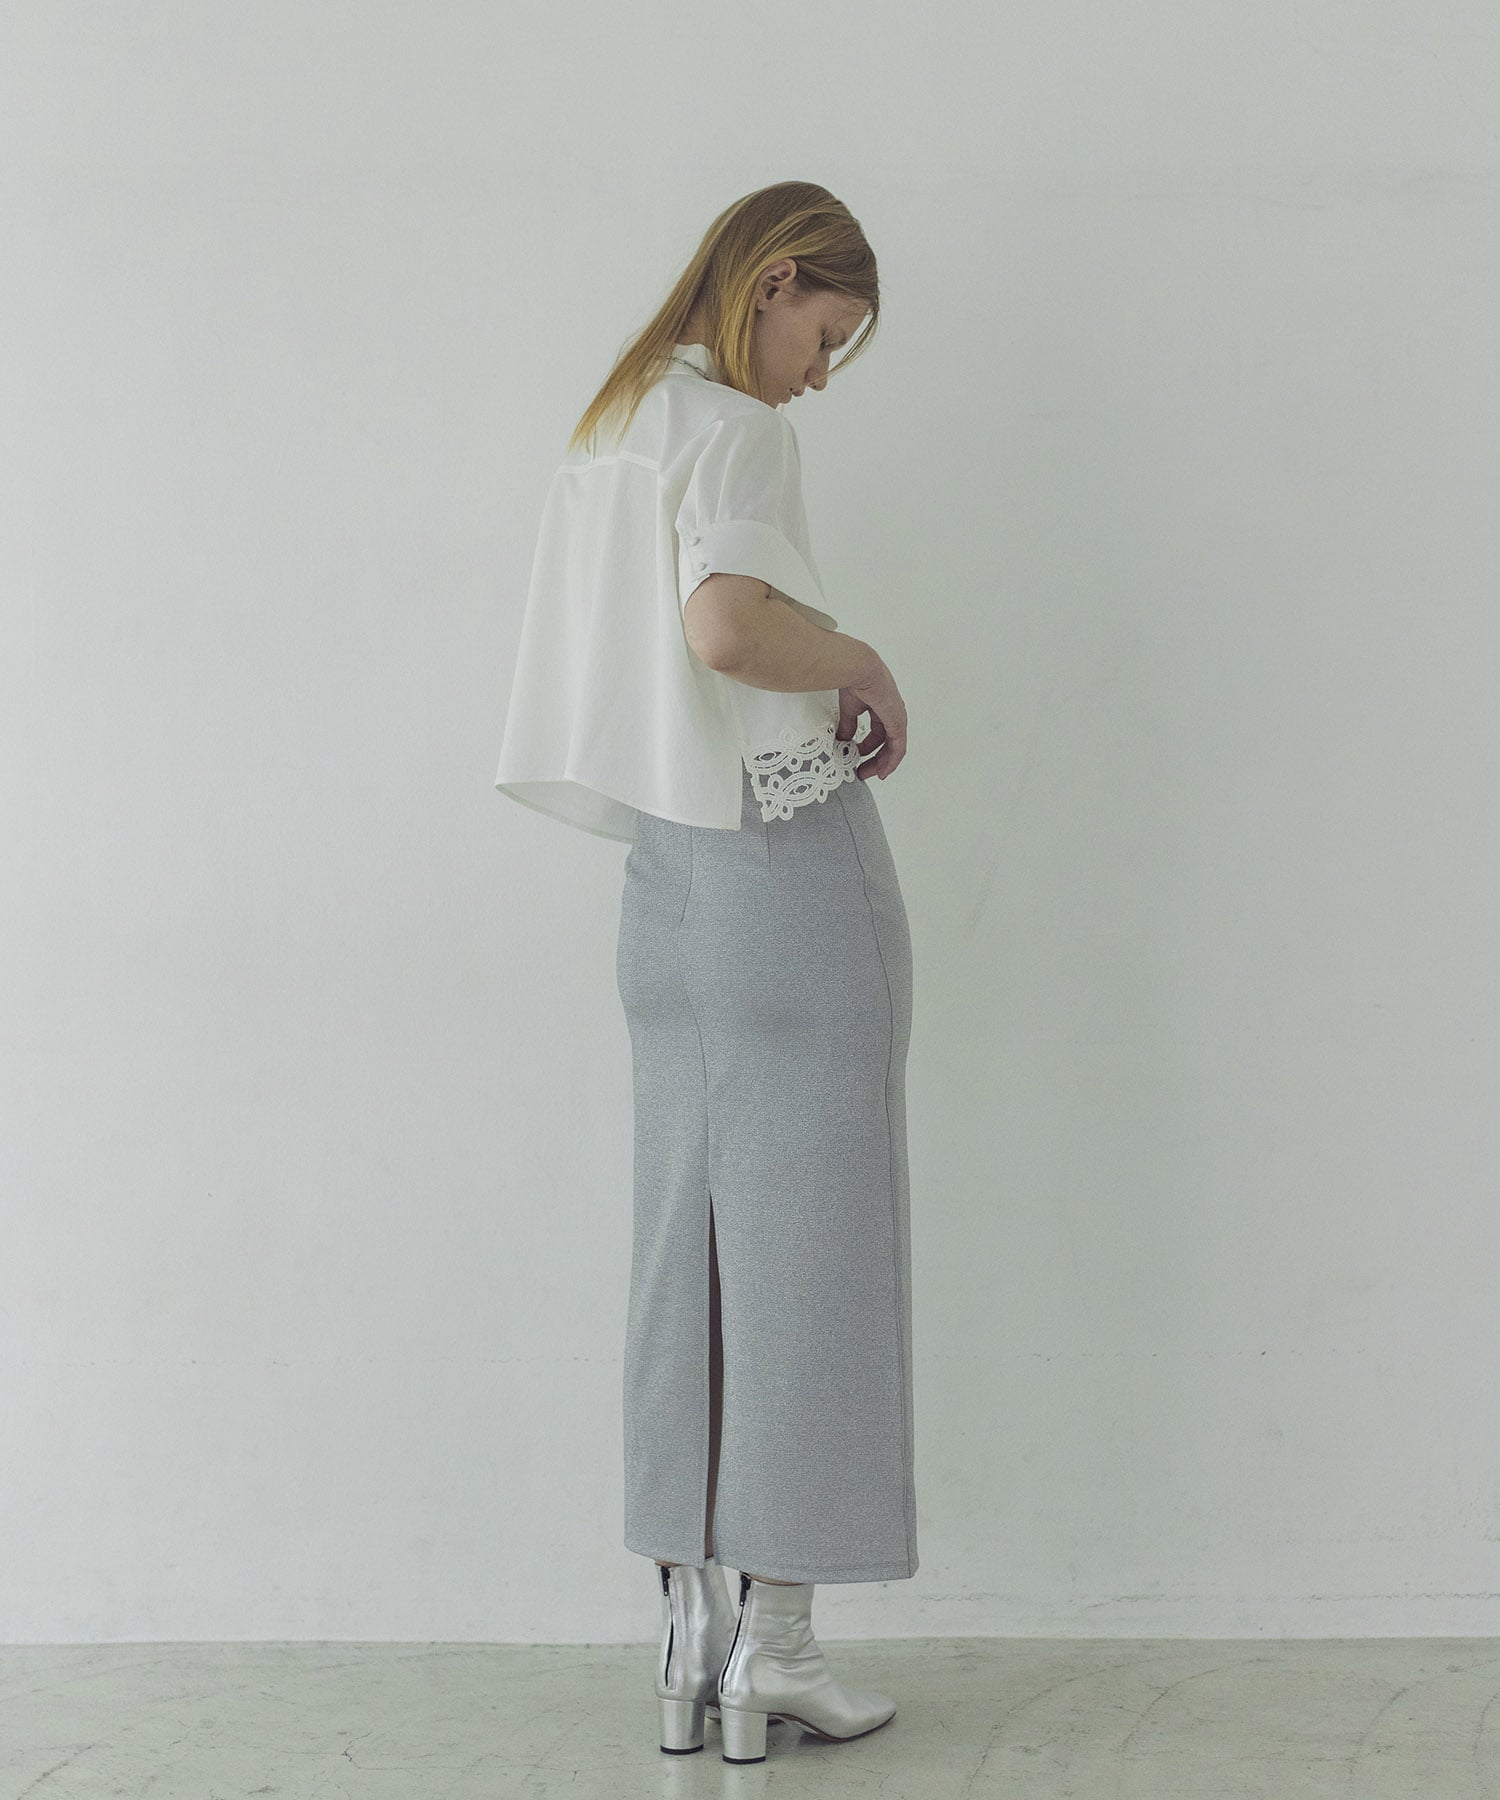 RAME jersey tight skirt | AND ON JIONE STORE（アンドオン）ジオン